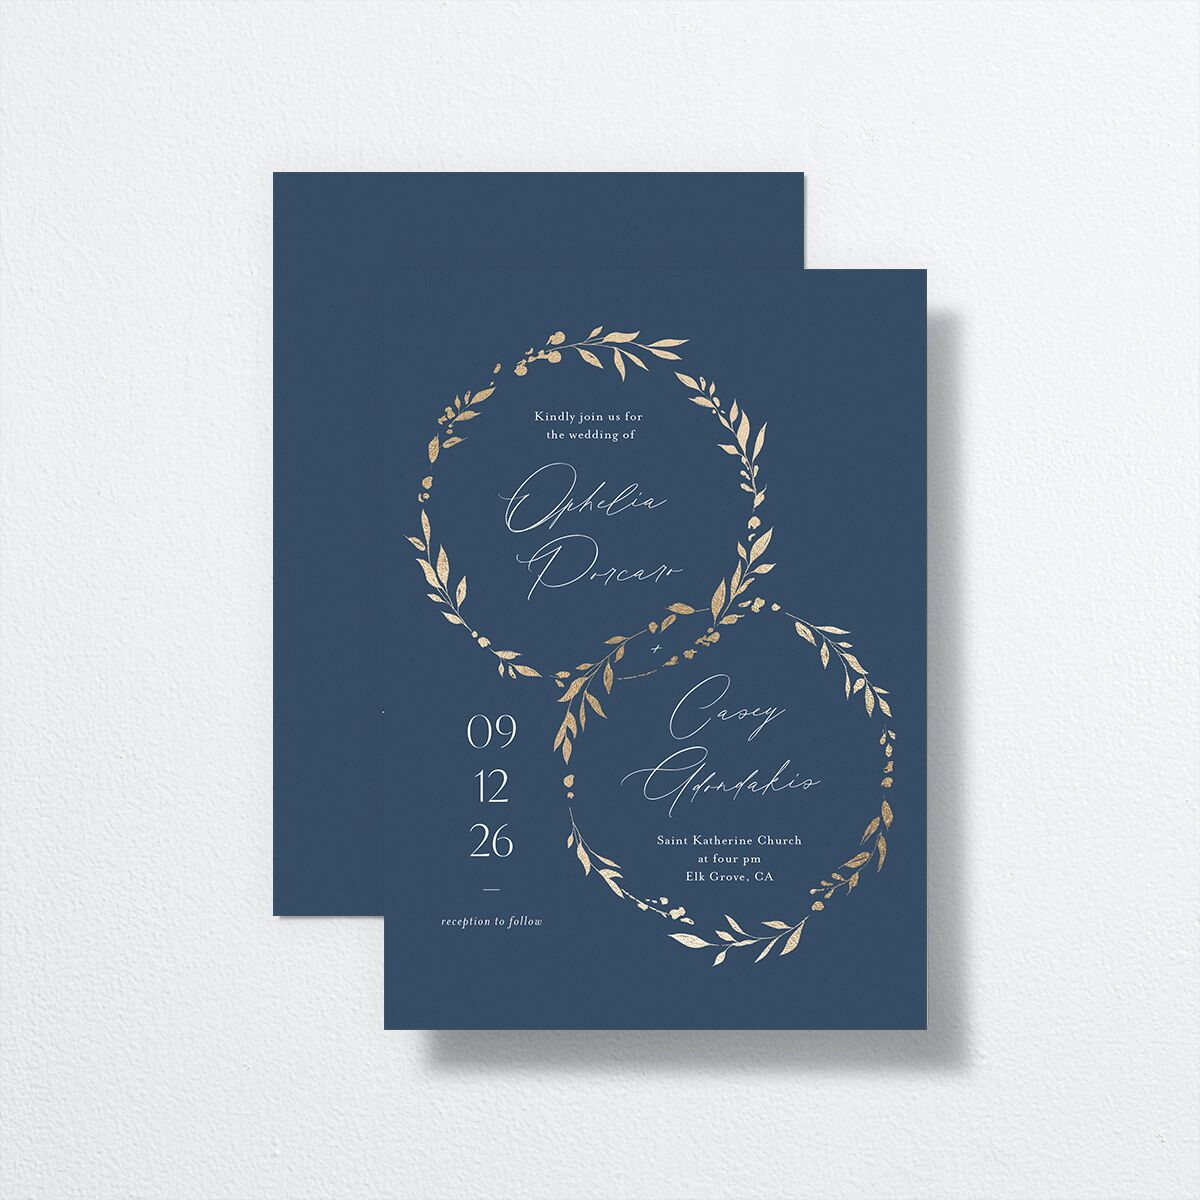 Stefana Crowns Wedding Invitations front-and-back in blue